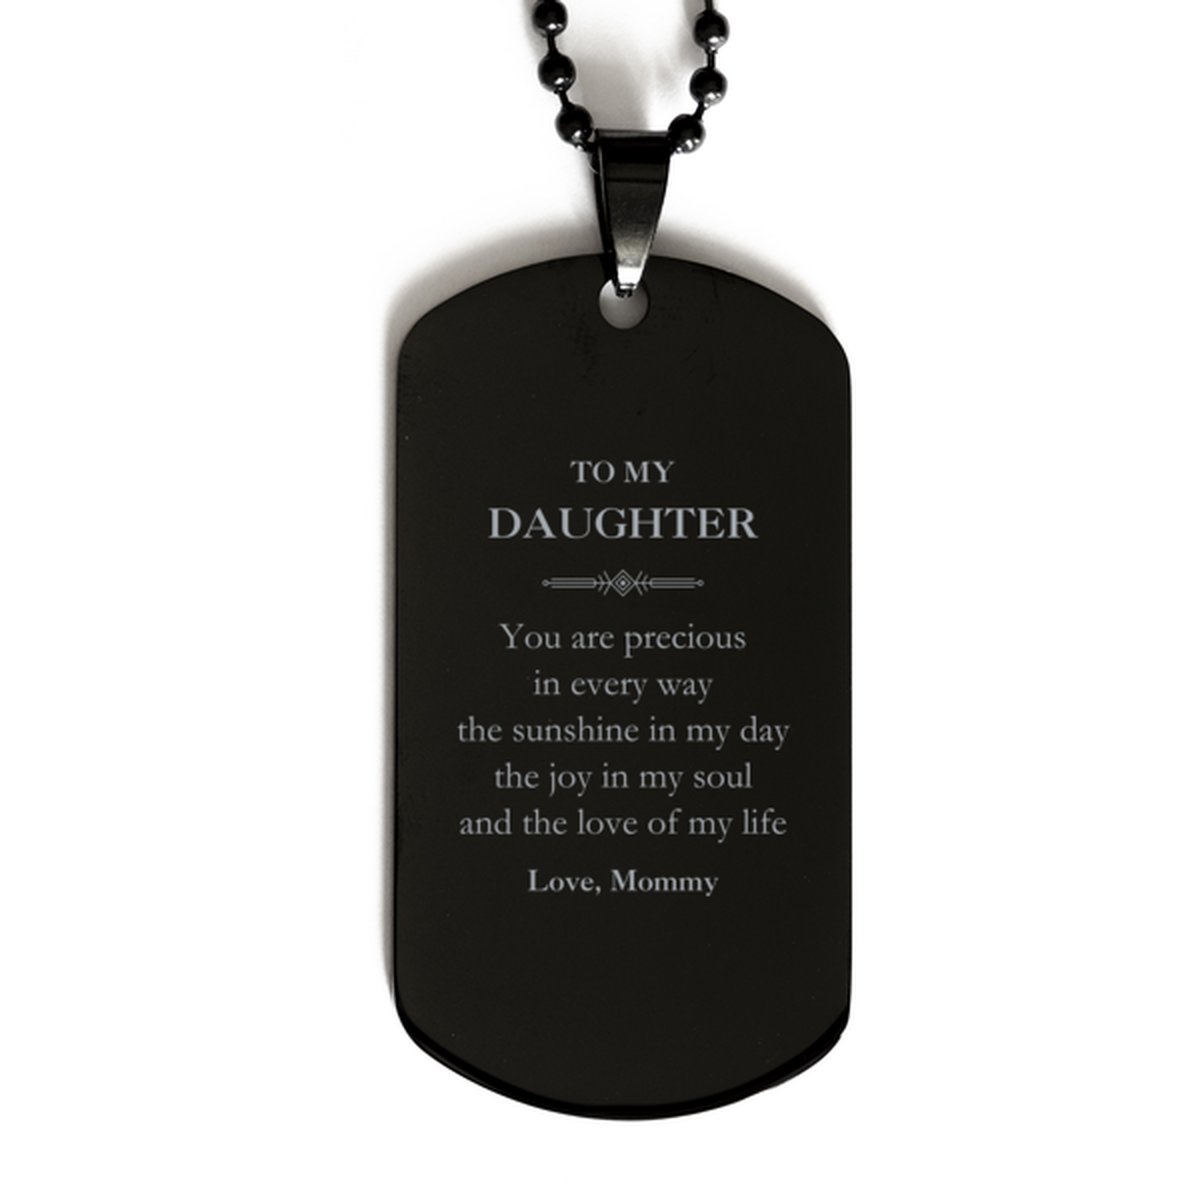 Graduation Gifts for Daughter Black Dog Tag Present from Mommy, Christmas Daughter Birthday Gifts Daughter You are precious in every way the sunshine in my day. Love, Mommy